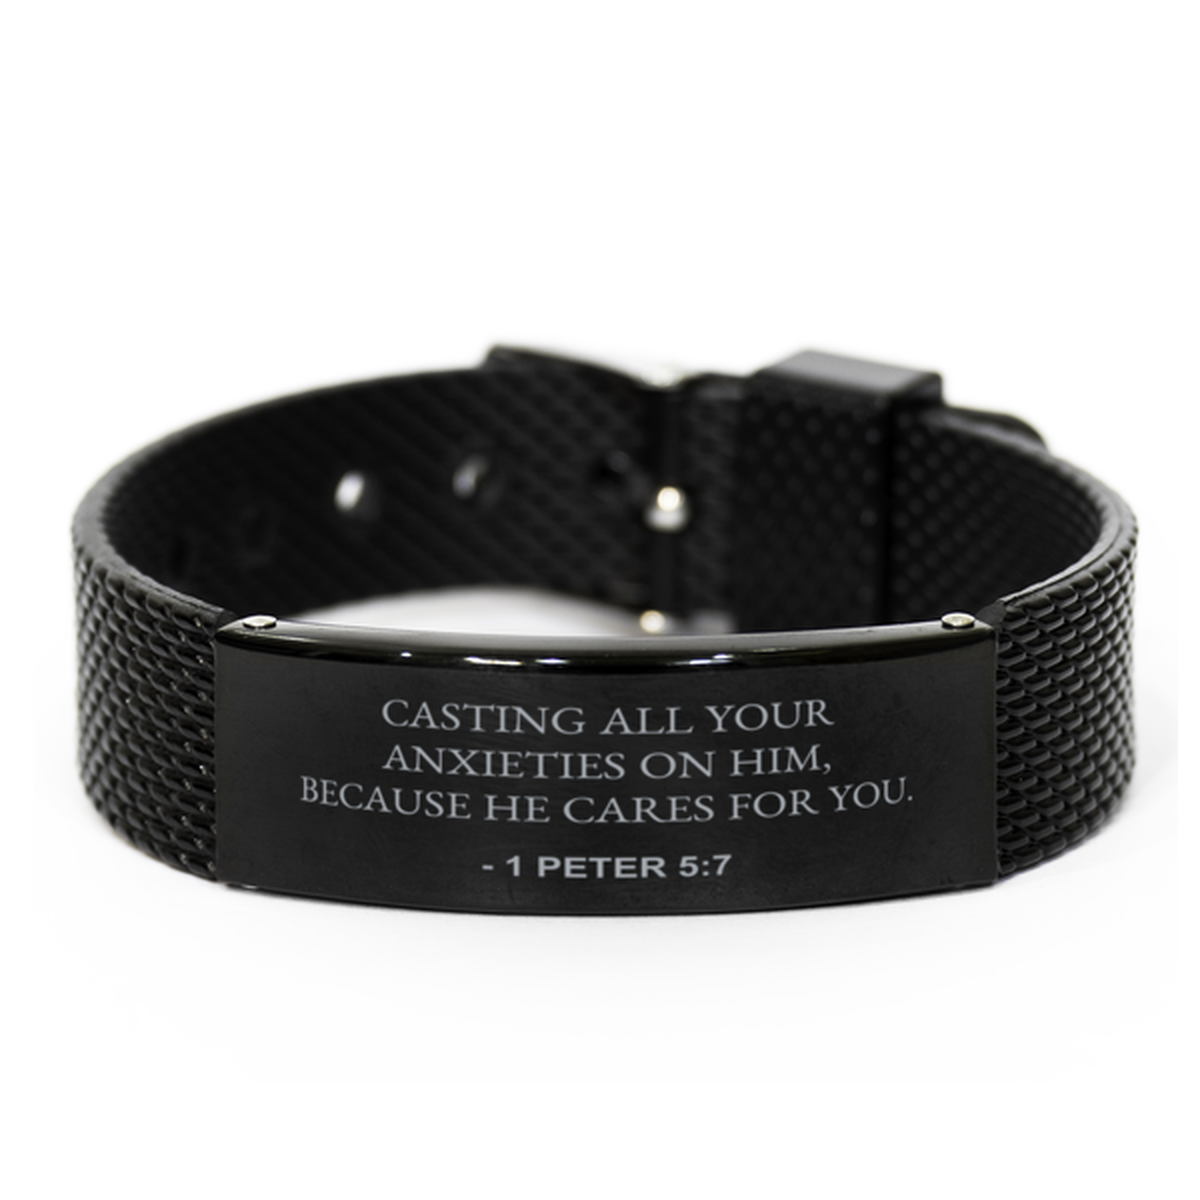 Christian Black Bracelet,, 1 Peter 5:7 Casting All Your Anxieties On Him, Because He, Motivational Bible Verse Gifts For Men Women